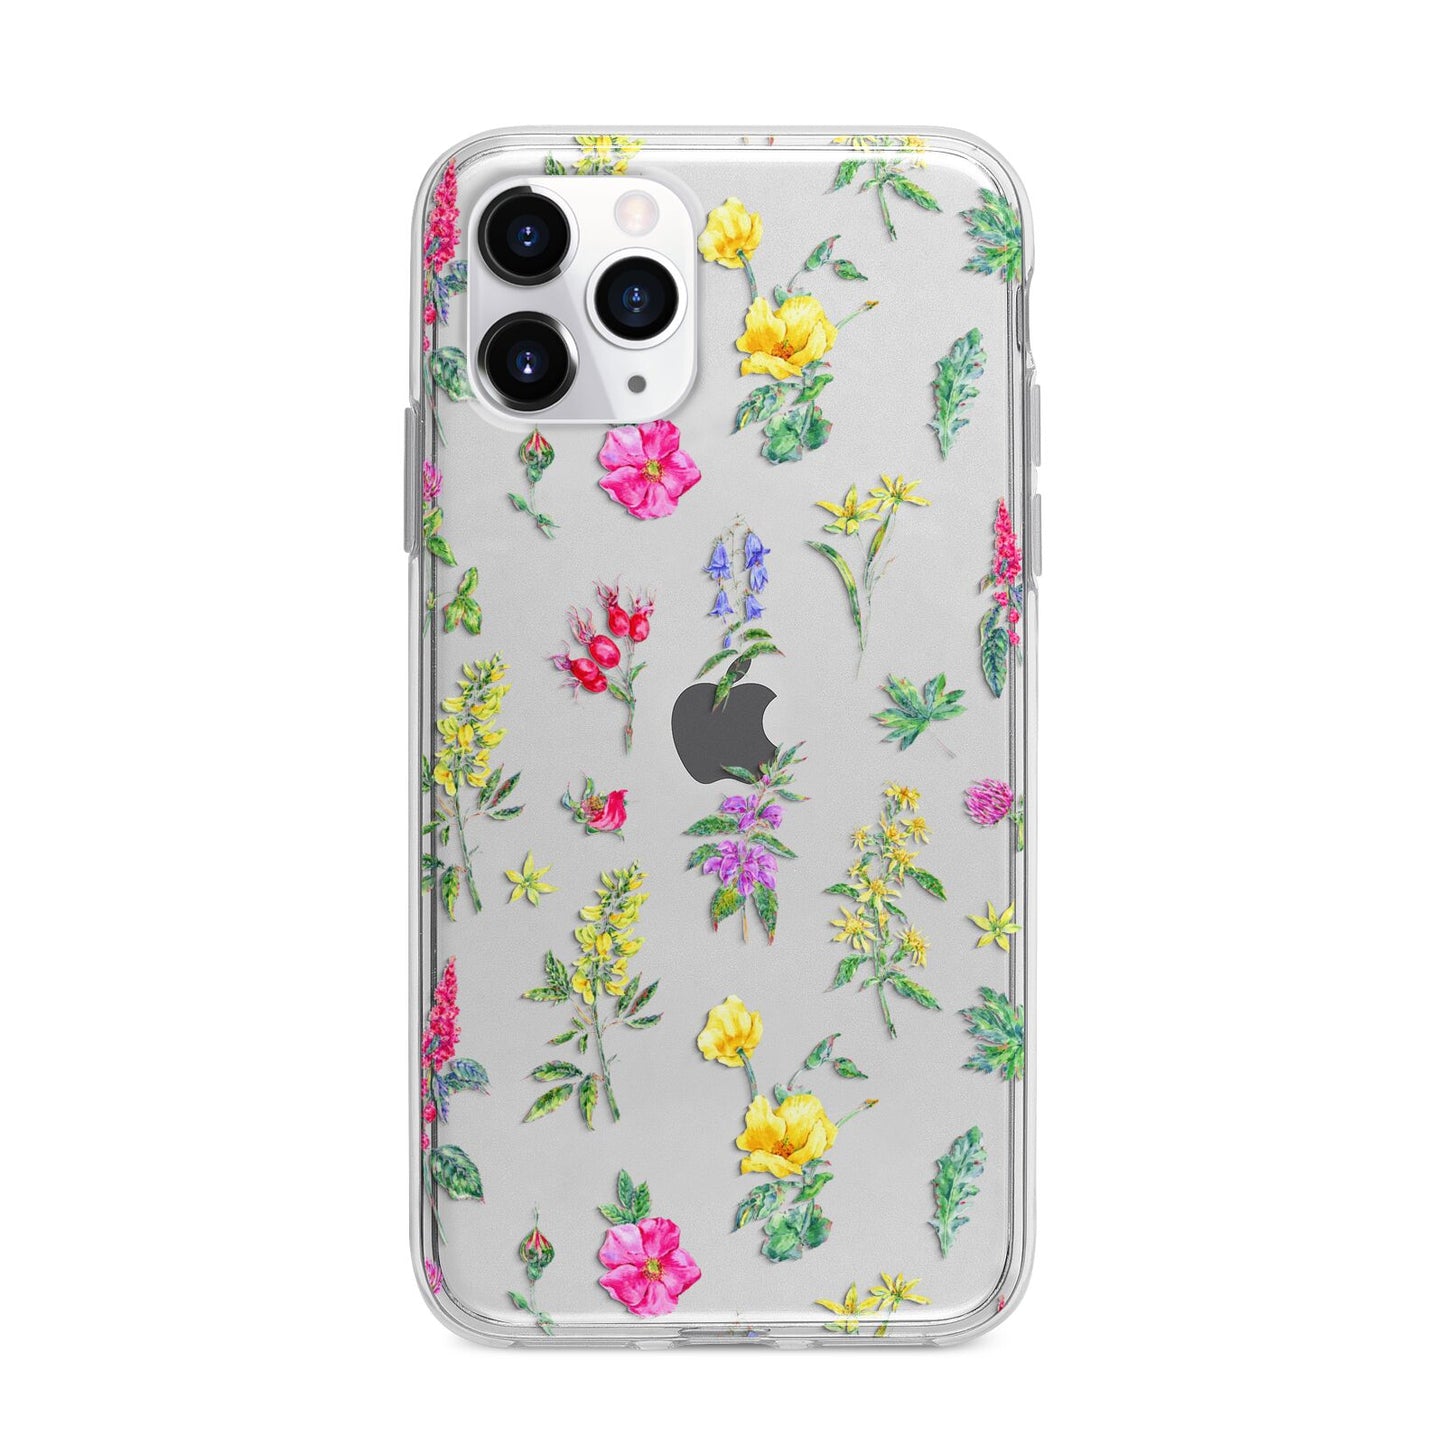 Sprigs Of Floral Apple iPhone 11 Pro in Silver with Bumper Case